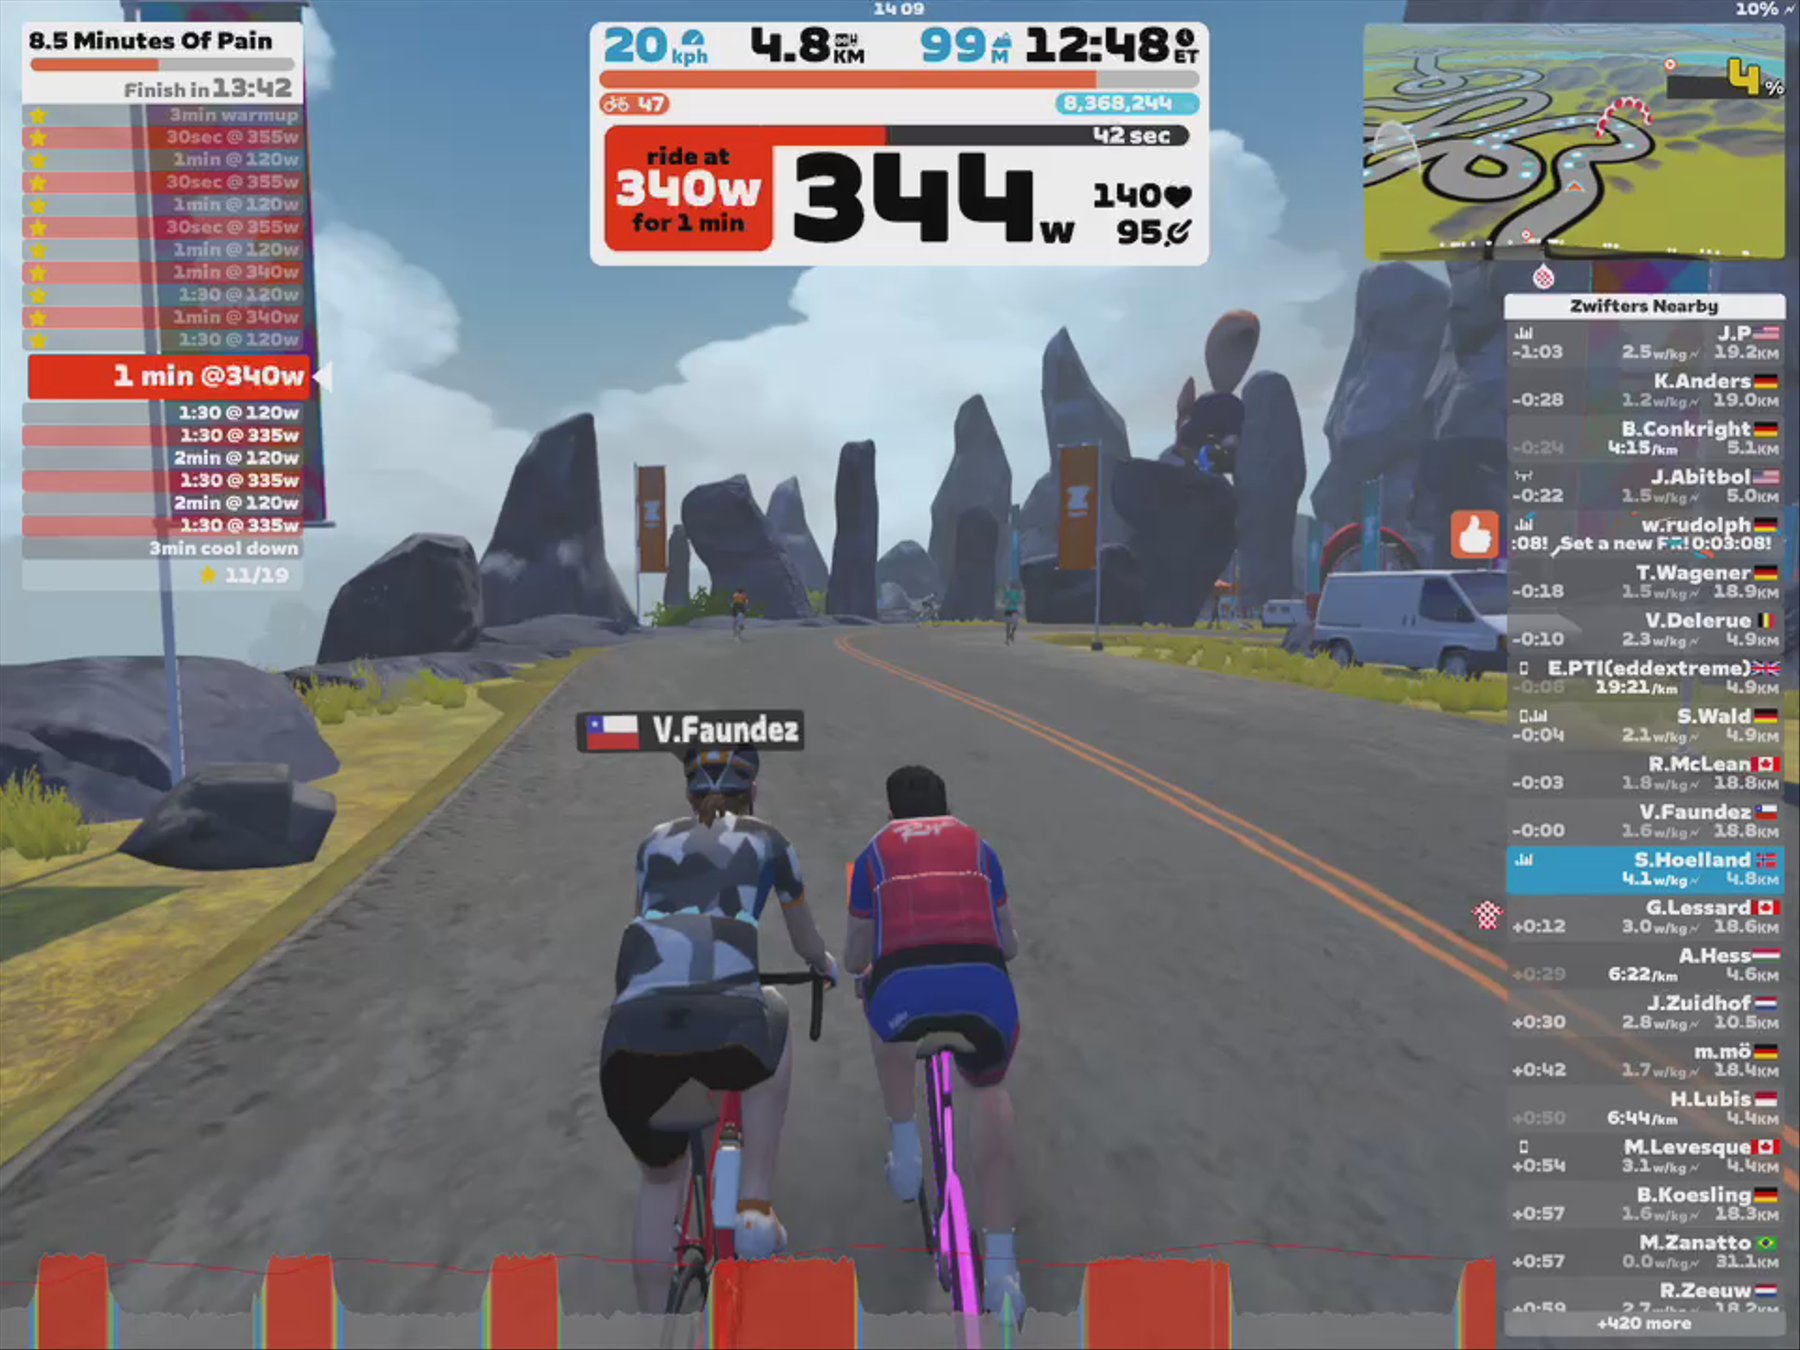 Zwift - Le Col - Training With Legends - Dame Sarah Storey - 8.5 Minutes Of Pain in Scotland